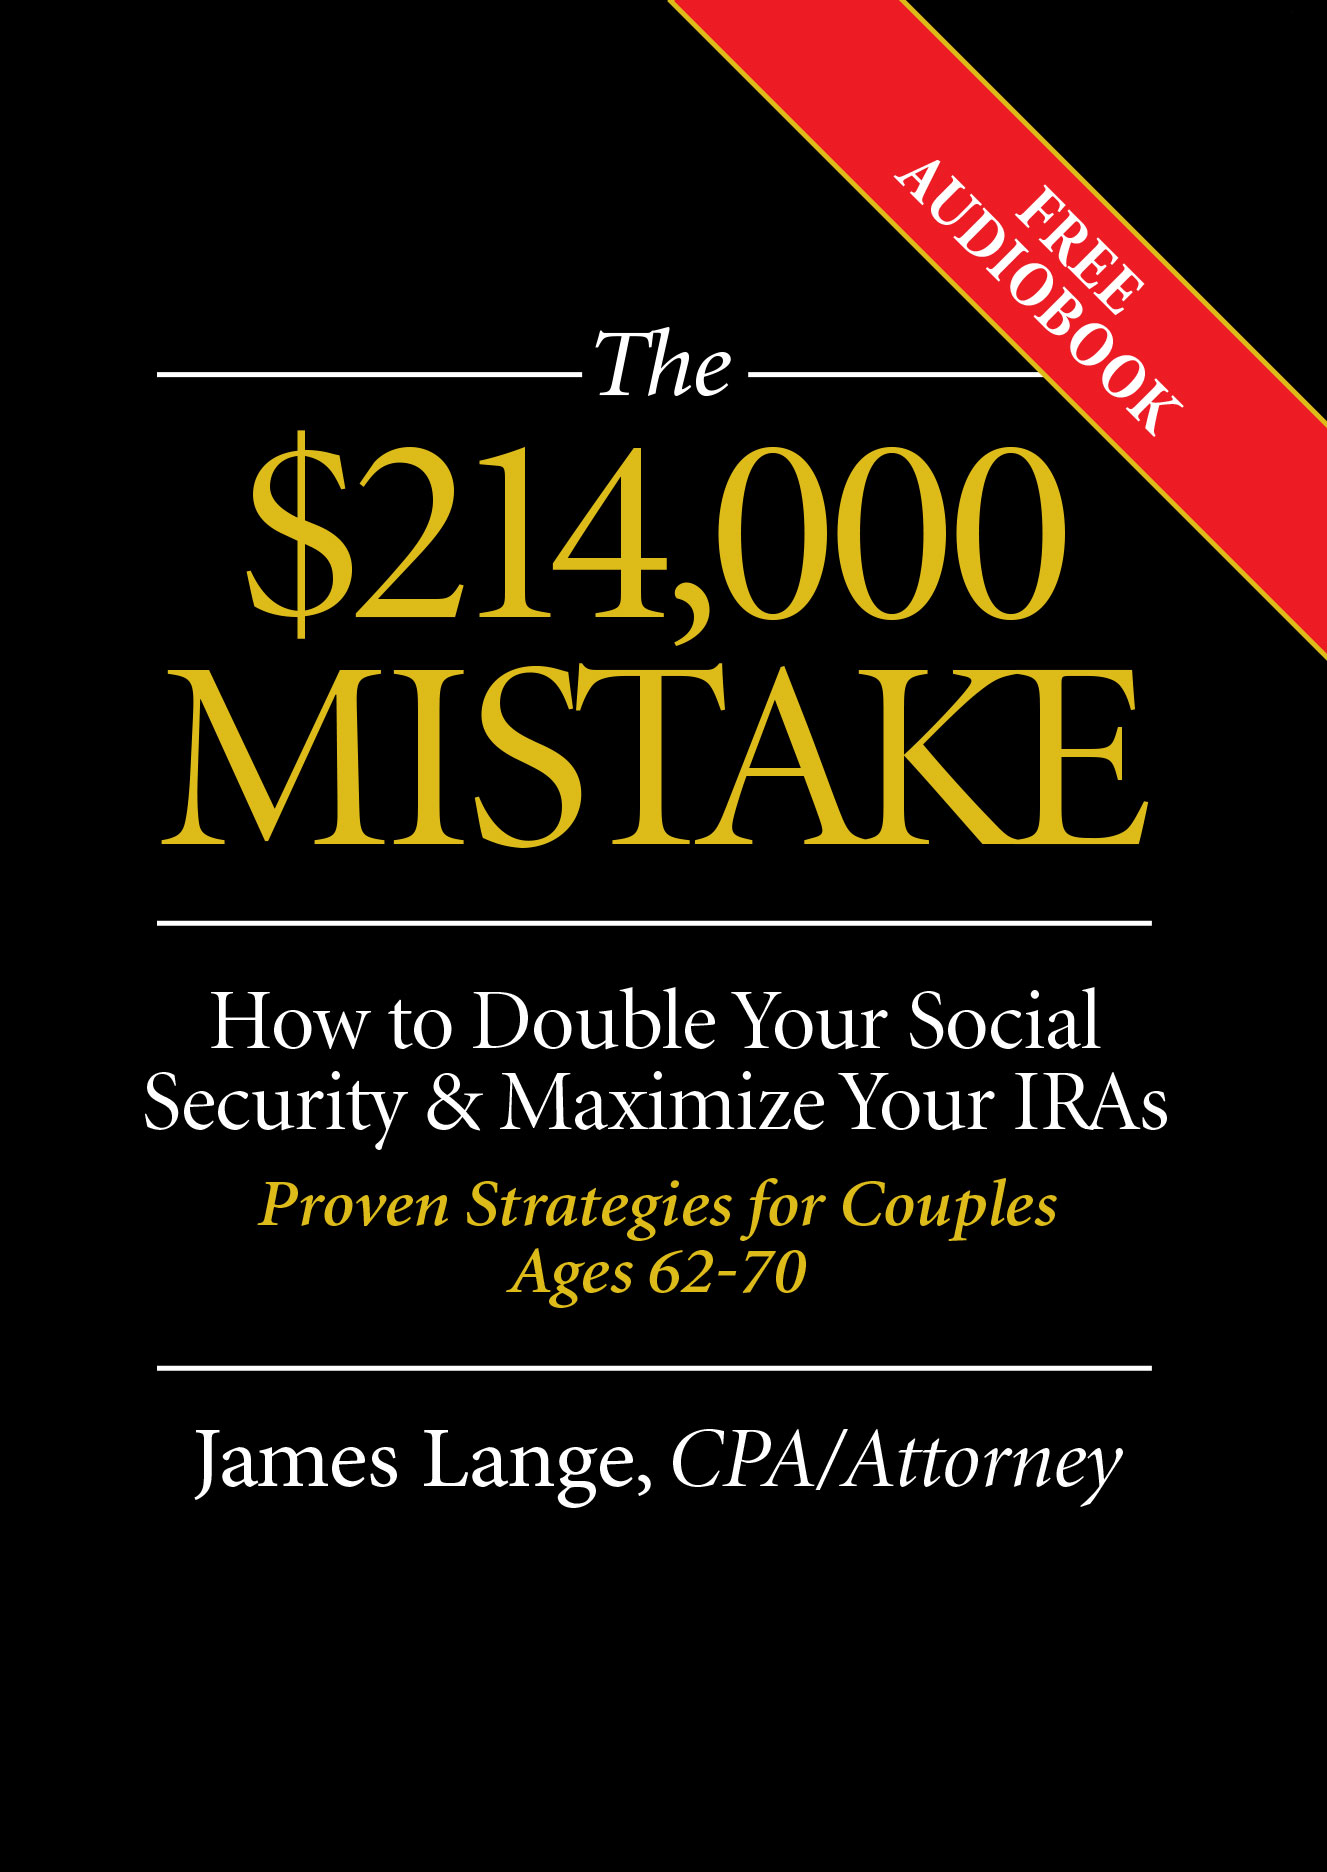 The-214,000-Mistake-How-to-Double-Your-Social-Security-&-Maximize-Your-IRAs-Proven-Strategies-for-Couples-Ages-62-to-70-James-Lange-CPA-Attorney